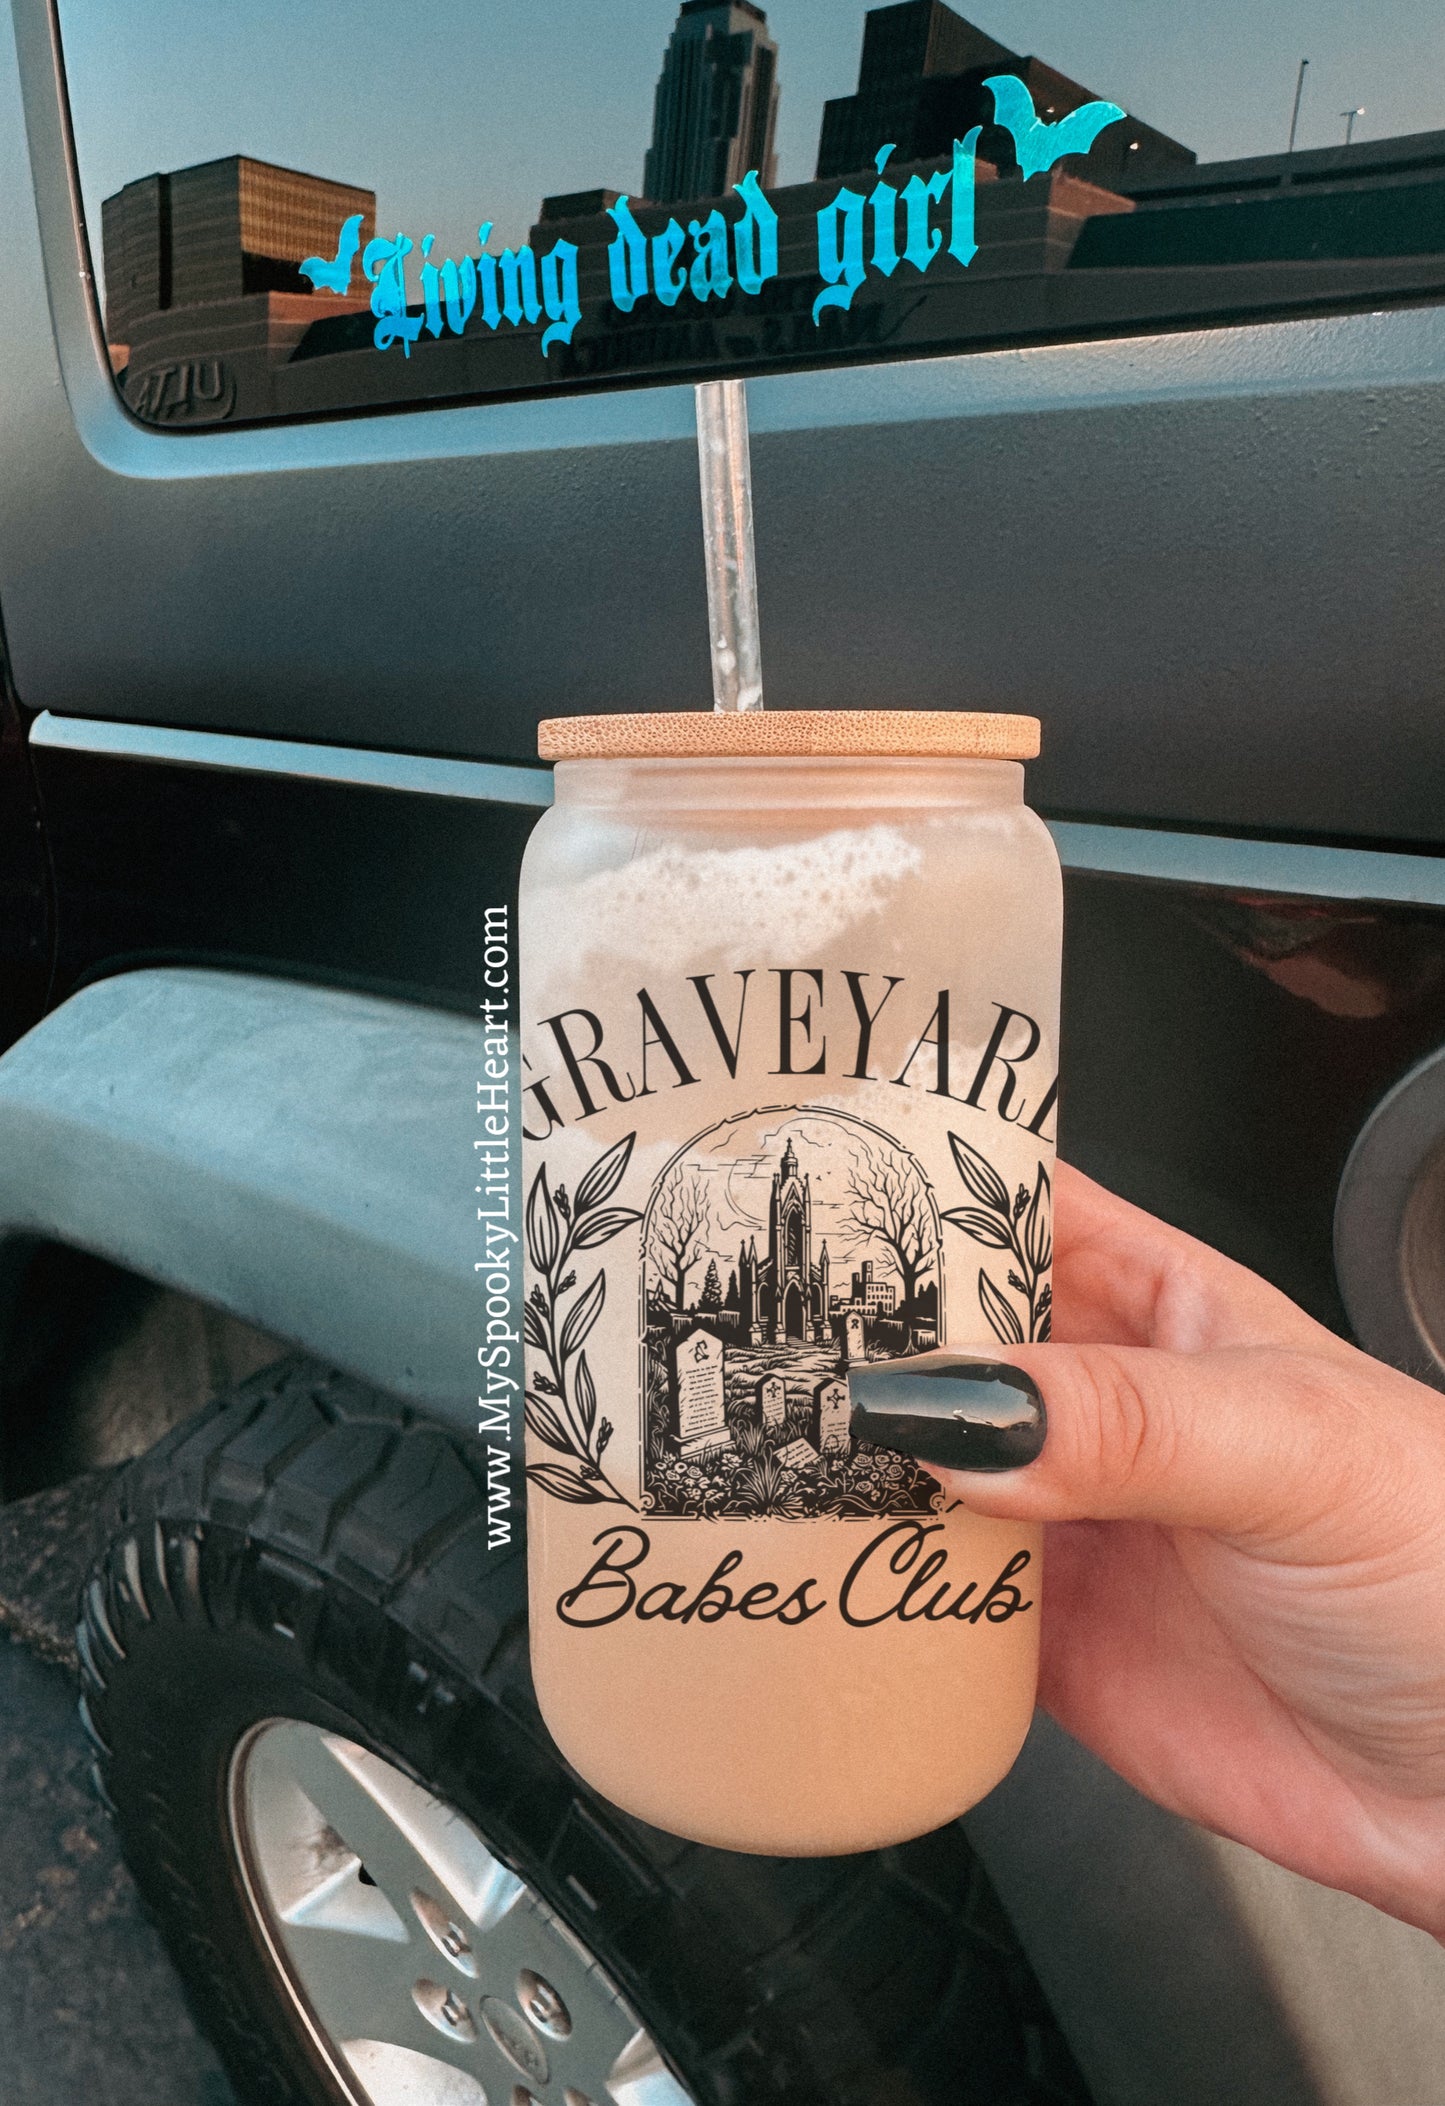 Graveyard Babes Club 16oz Frosted Glass Cup